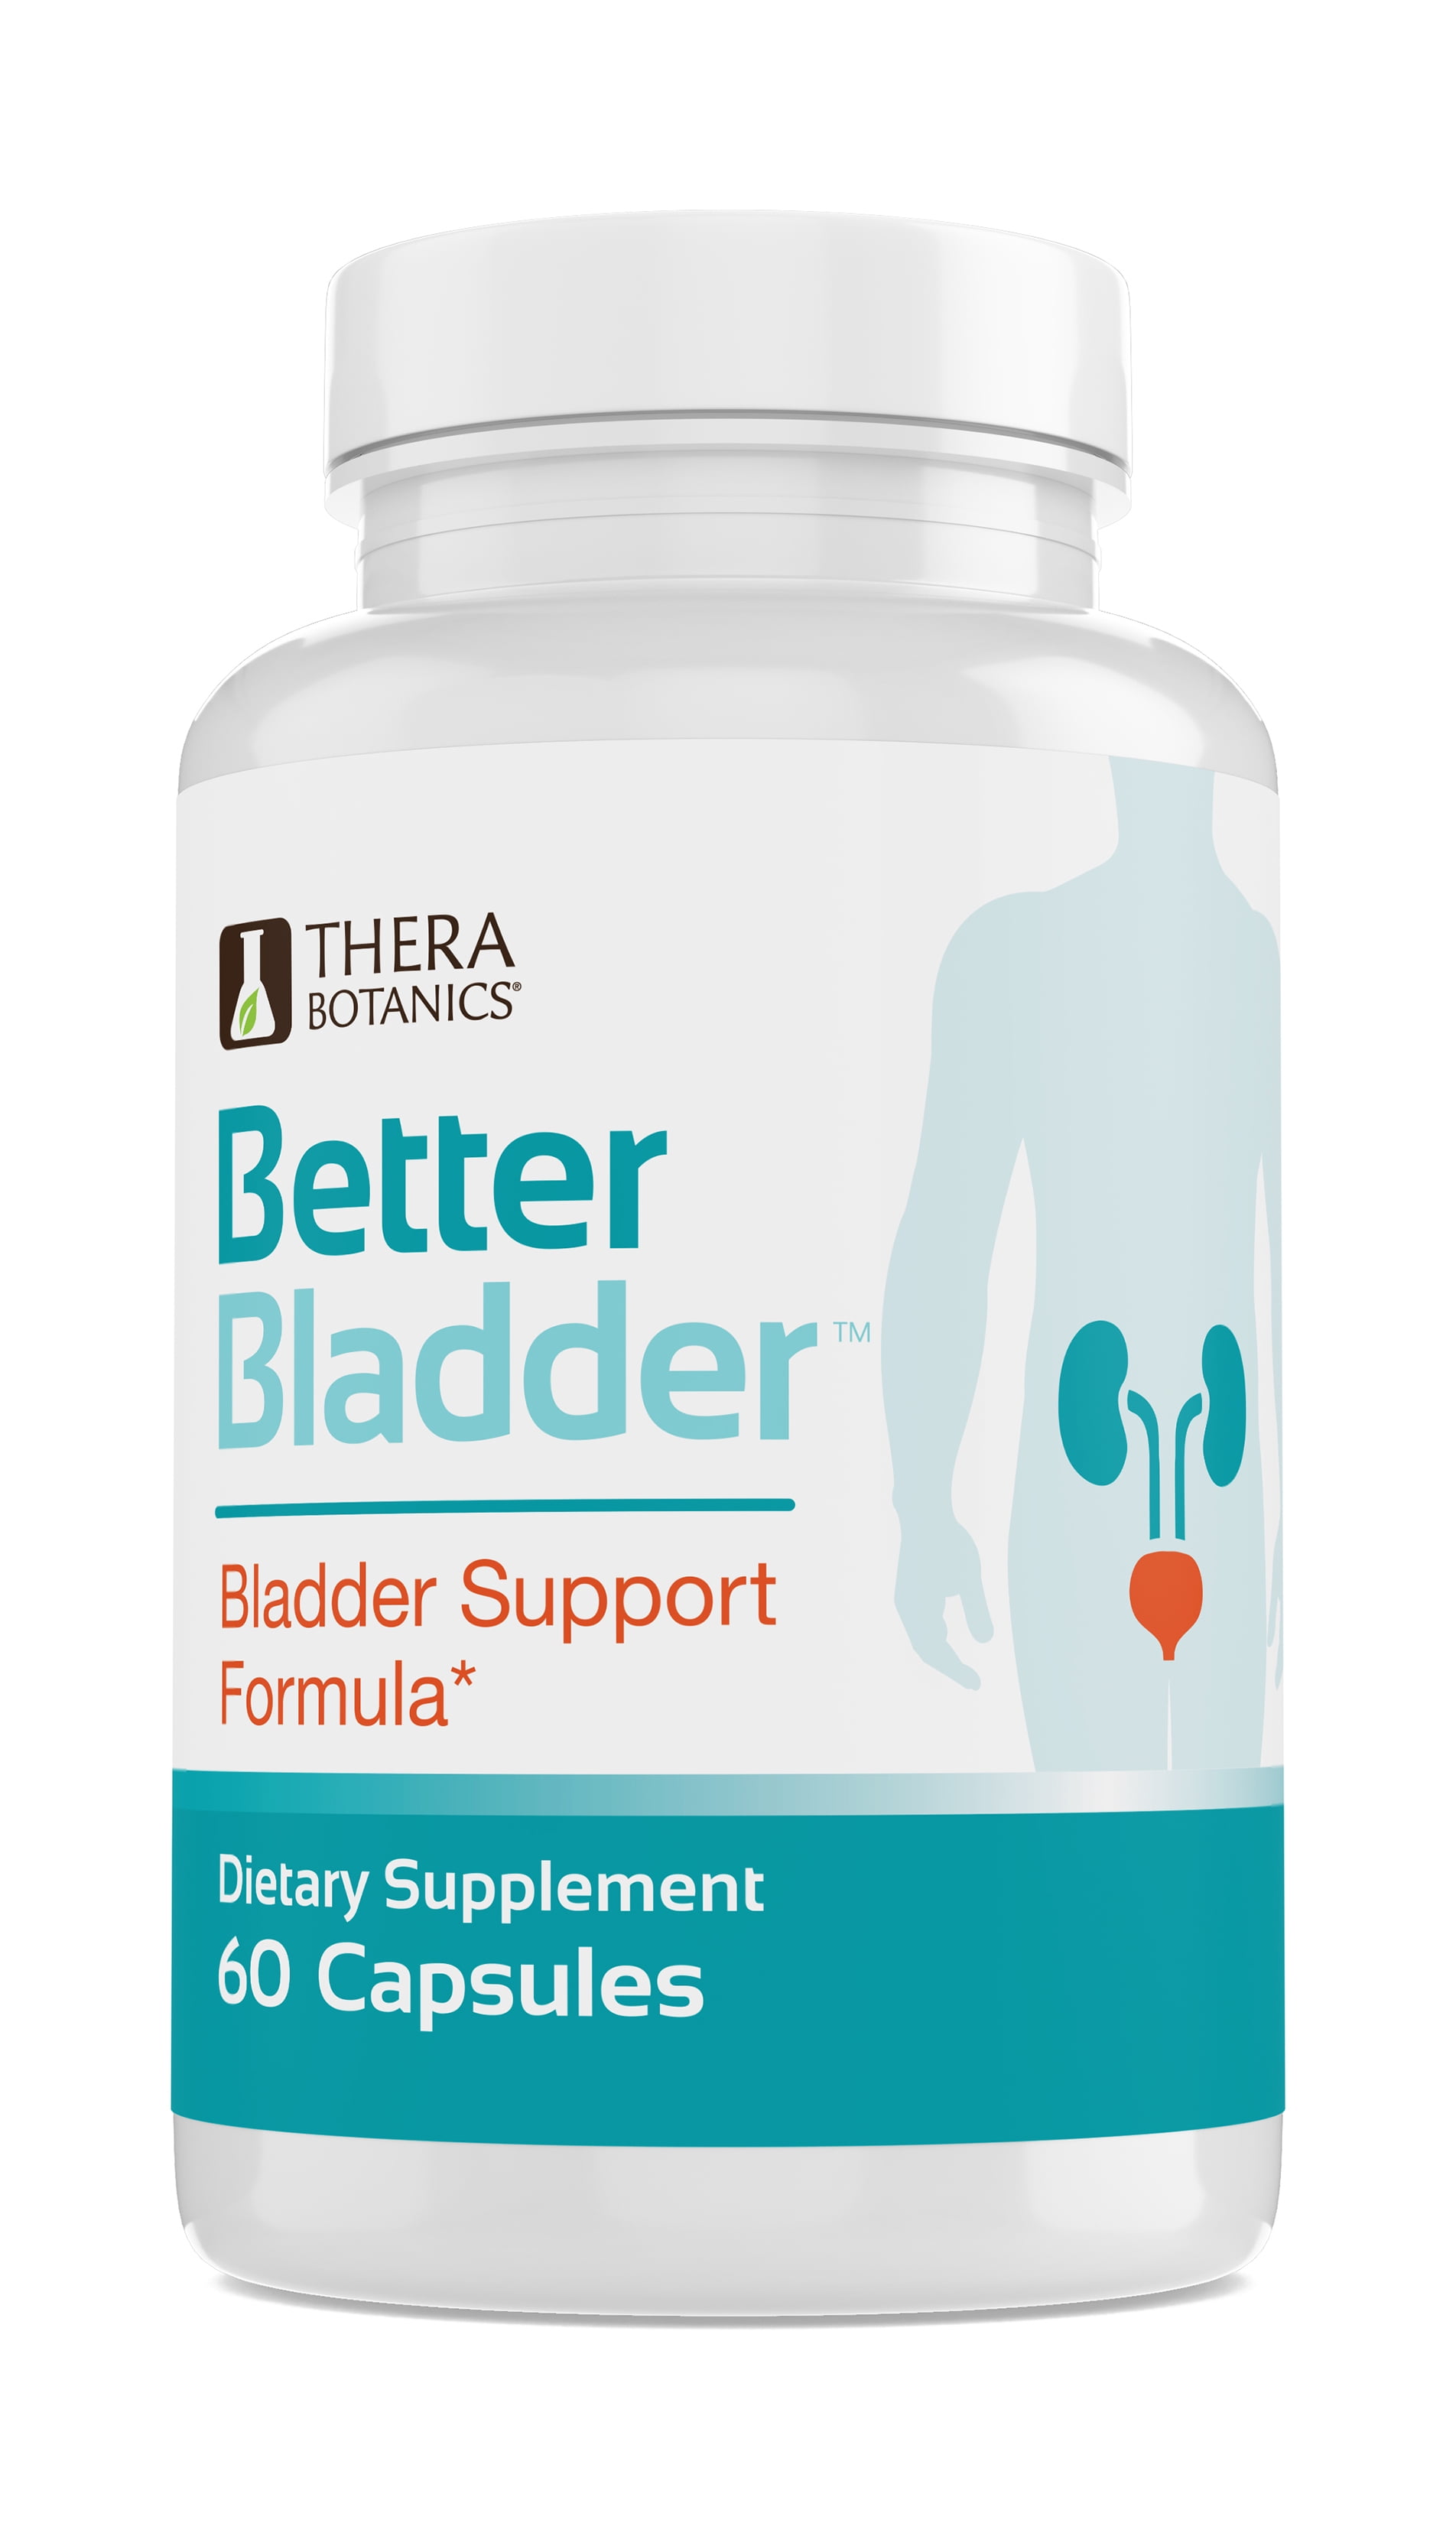 Better Bladder Control Supplement for Woman and Men- Bladder Support to  Help Reduce Urinary Leaks, Frequency & Urgency - Bladder Health Formula For  Good Night's Sleep 60 Bladder Capsules 